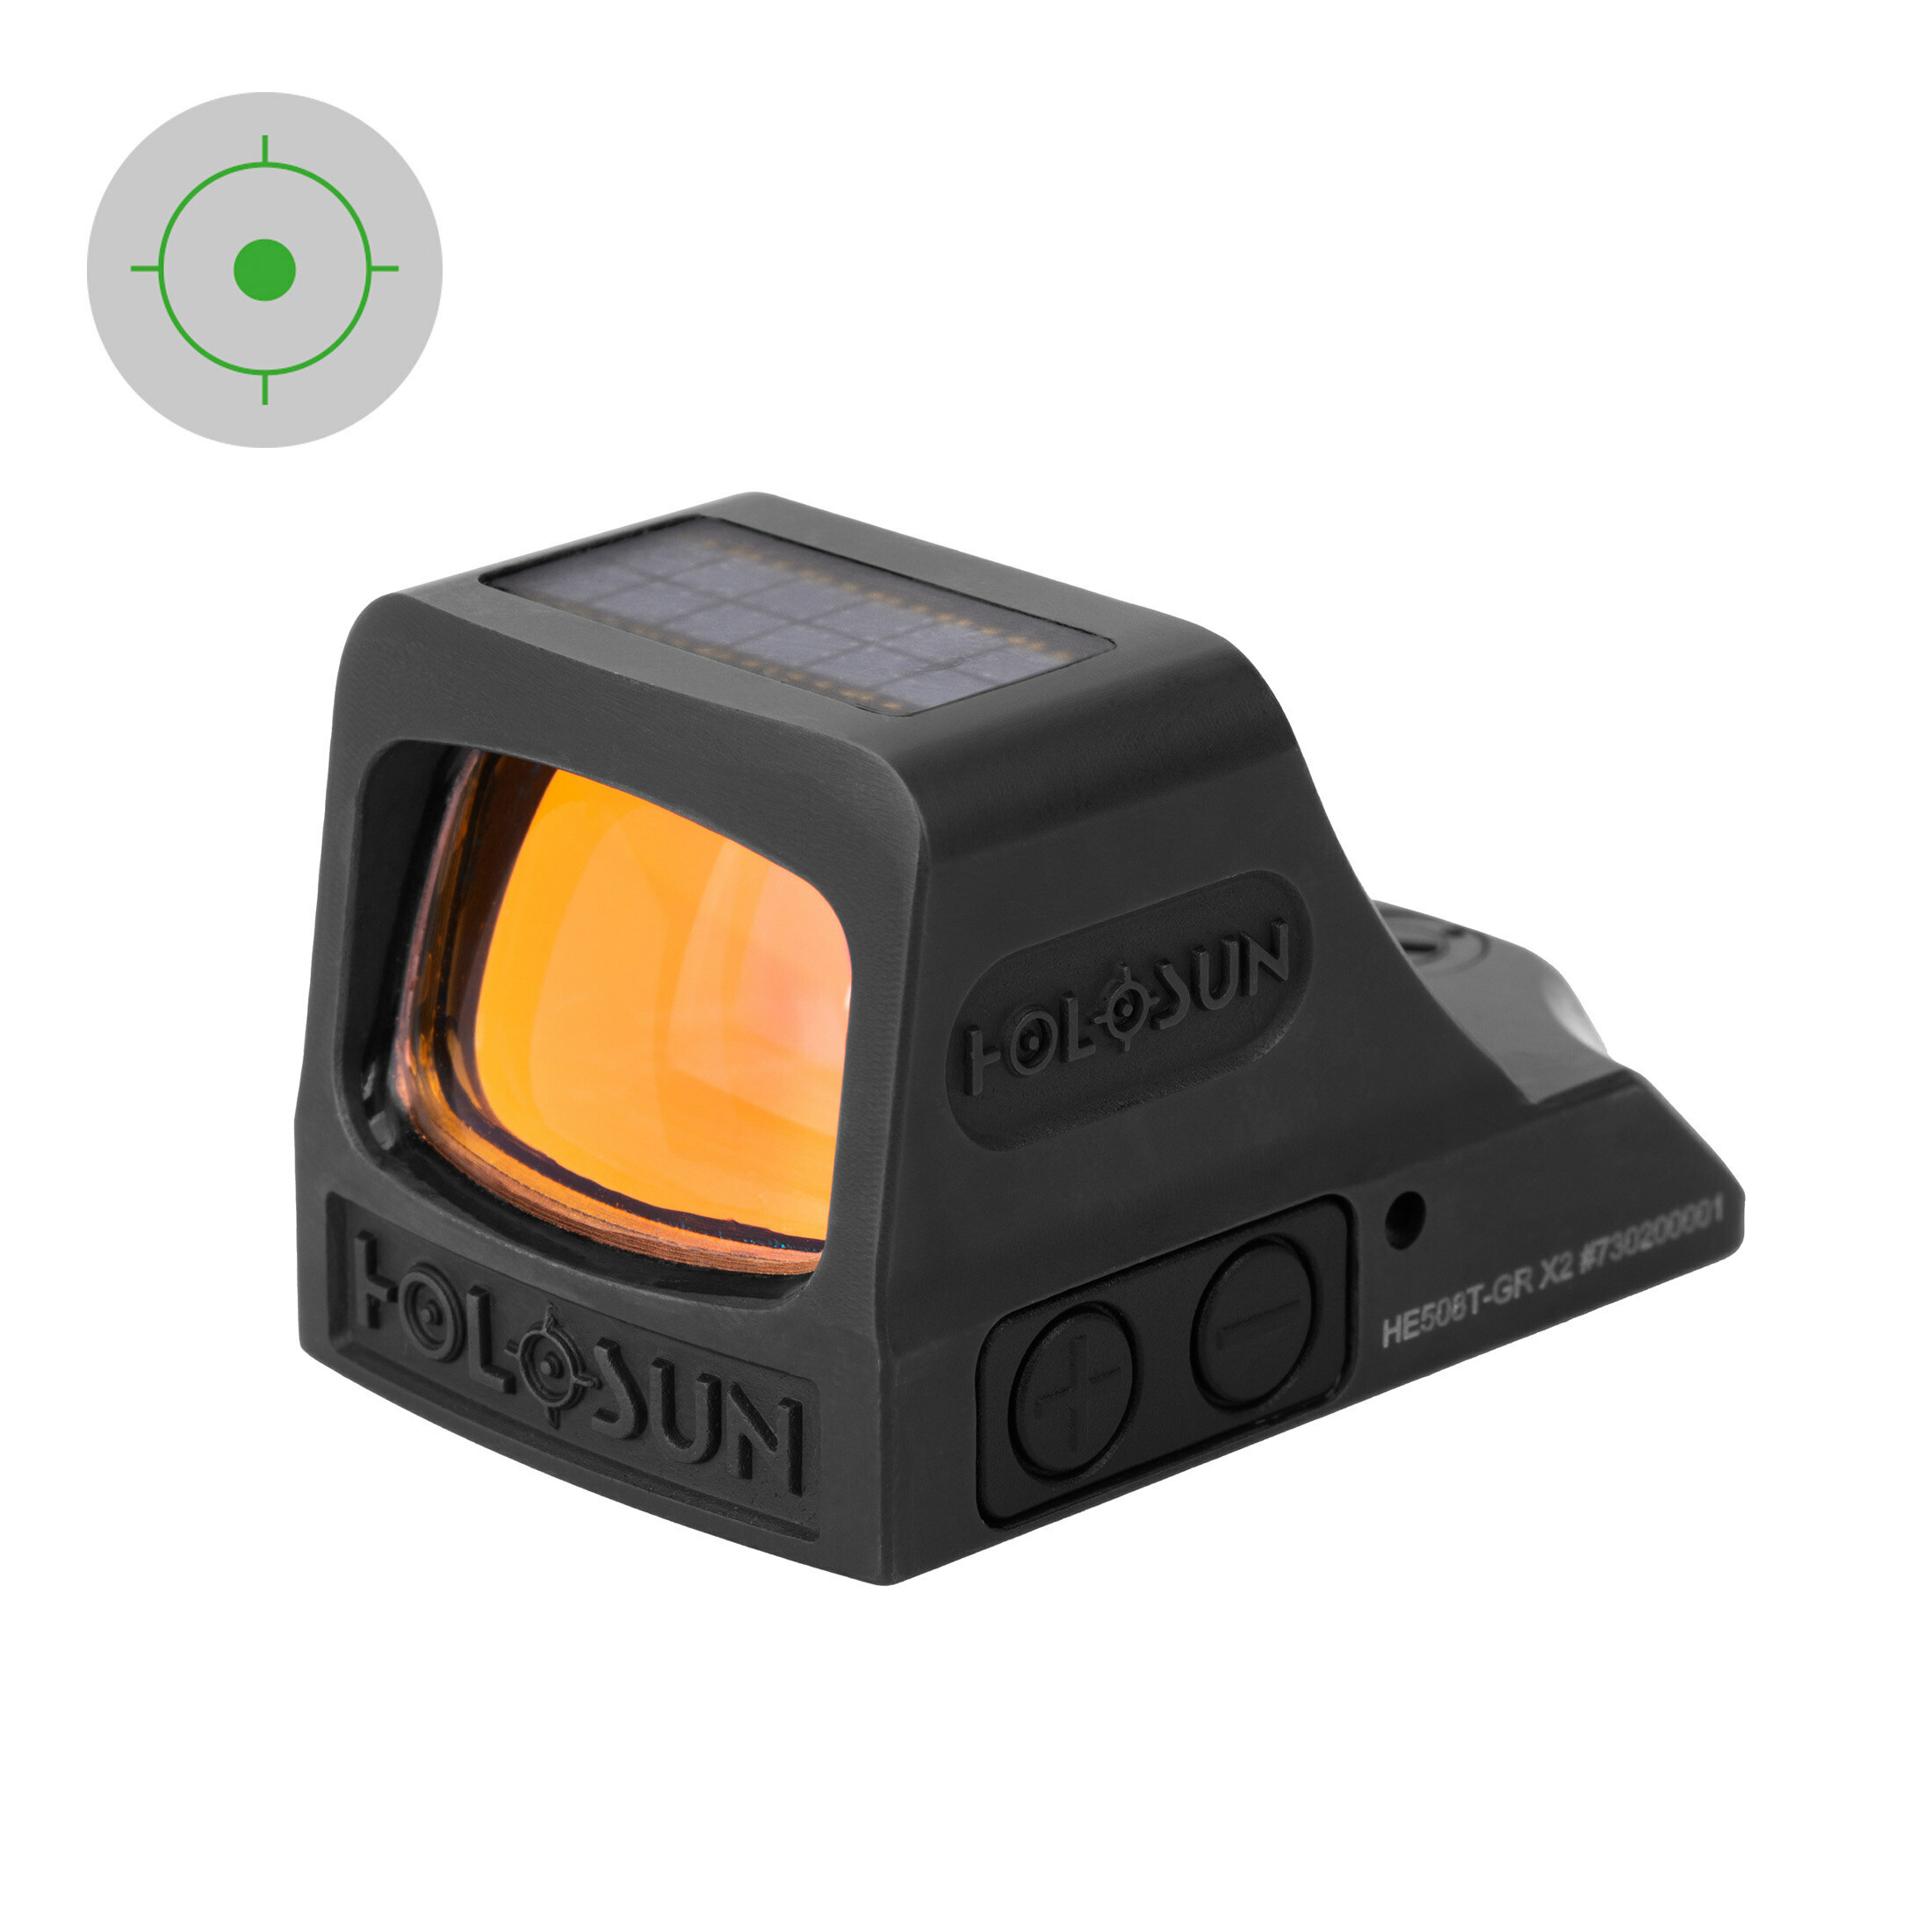 Holosun Open Reflex Green Dot Sight HE508T-GR-X2 with switchable reticle, innovative lock mode and …